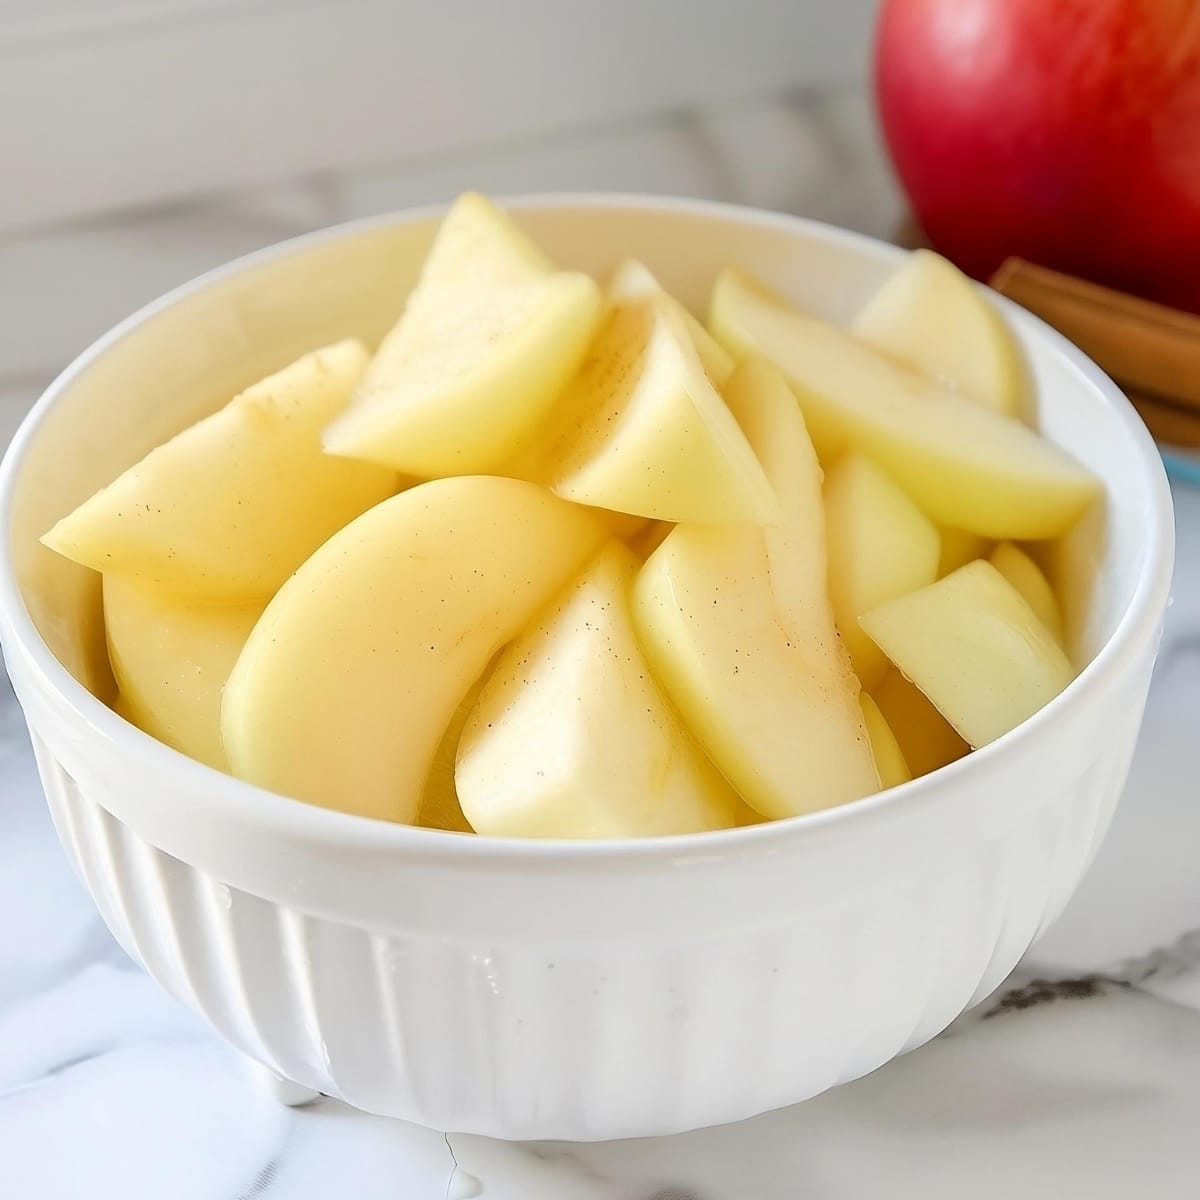 Peeled apple slices in white bowl.